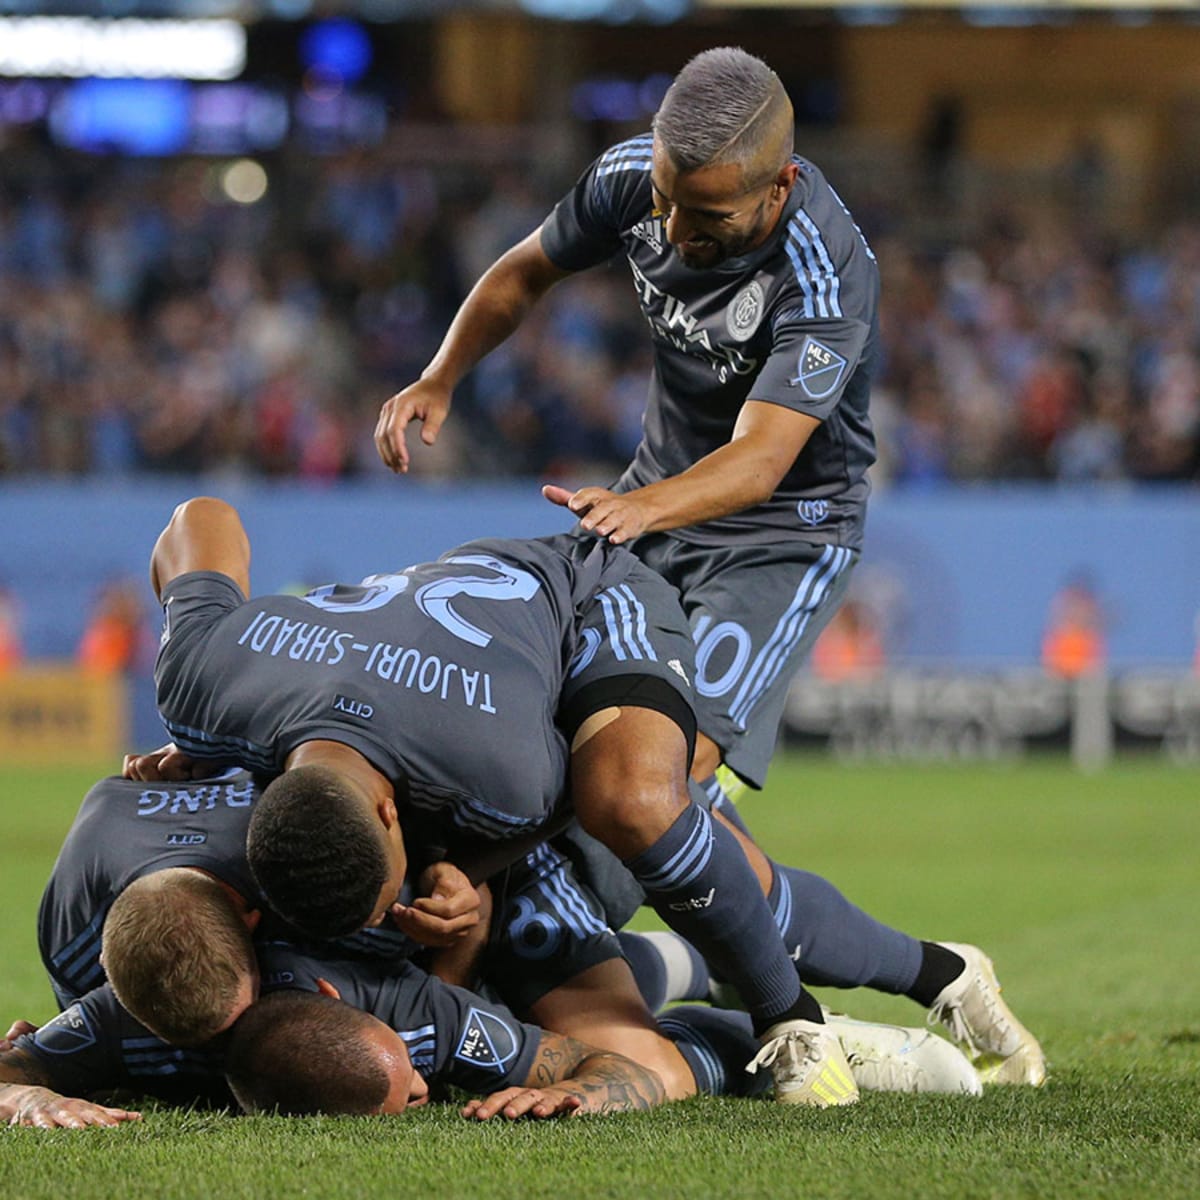 Revolution to host NYCFC in the MLS Eastern Conference semifinals